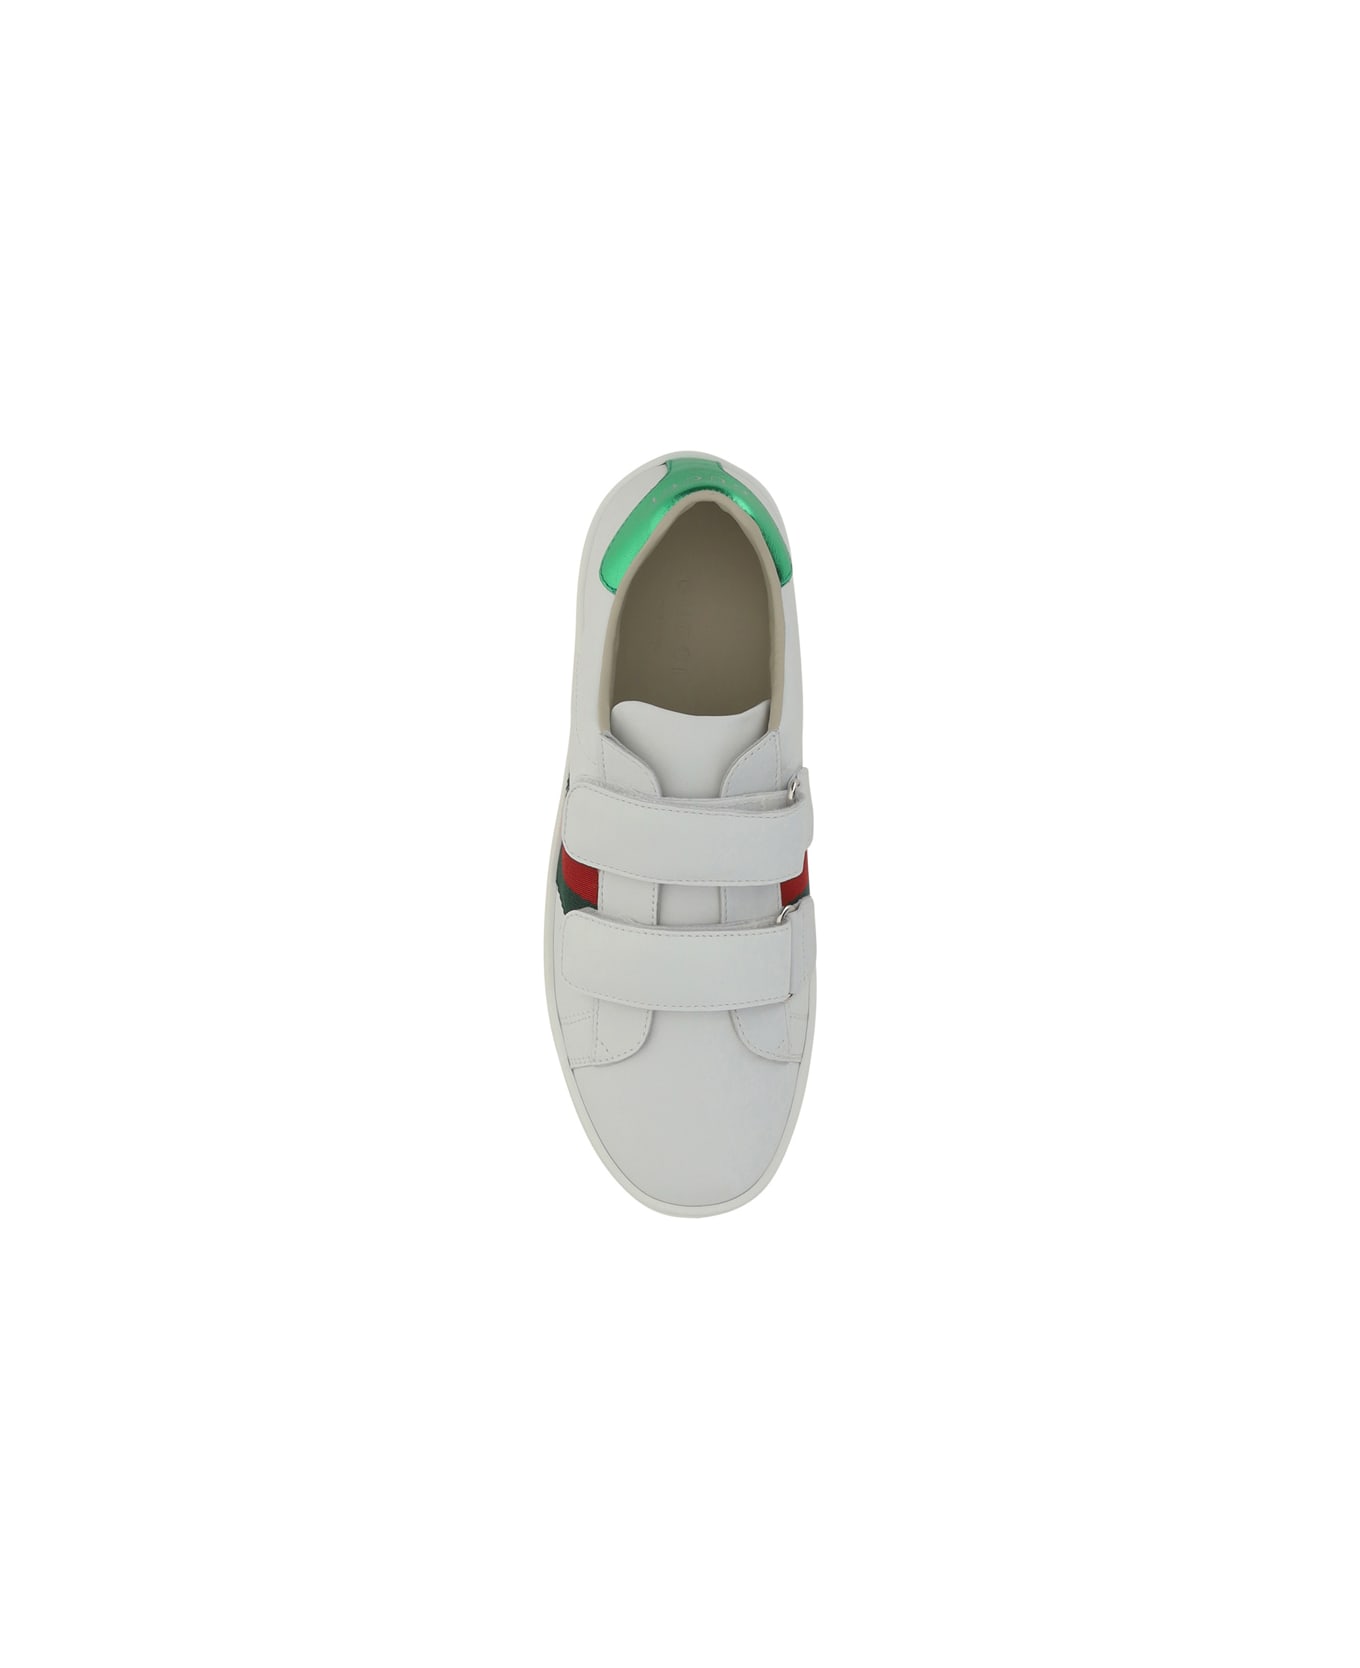 Gucci Sneakers For Boy - White